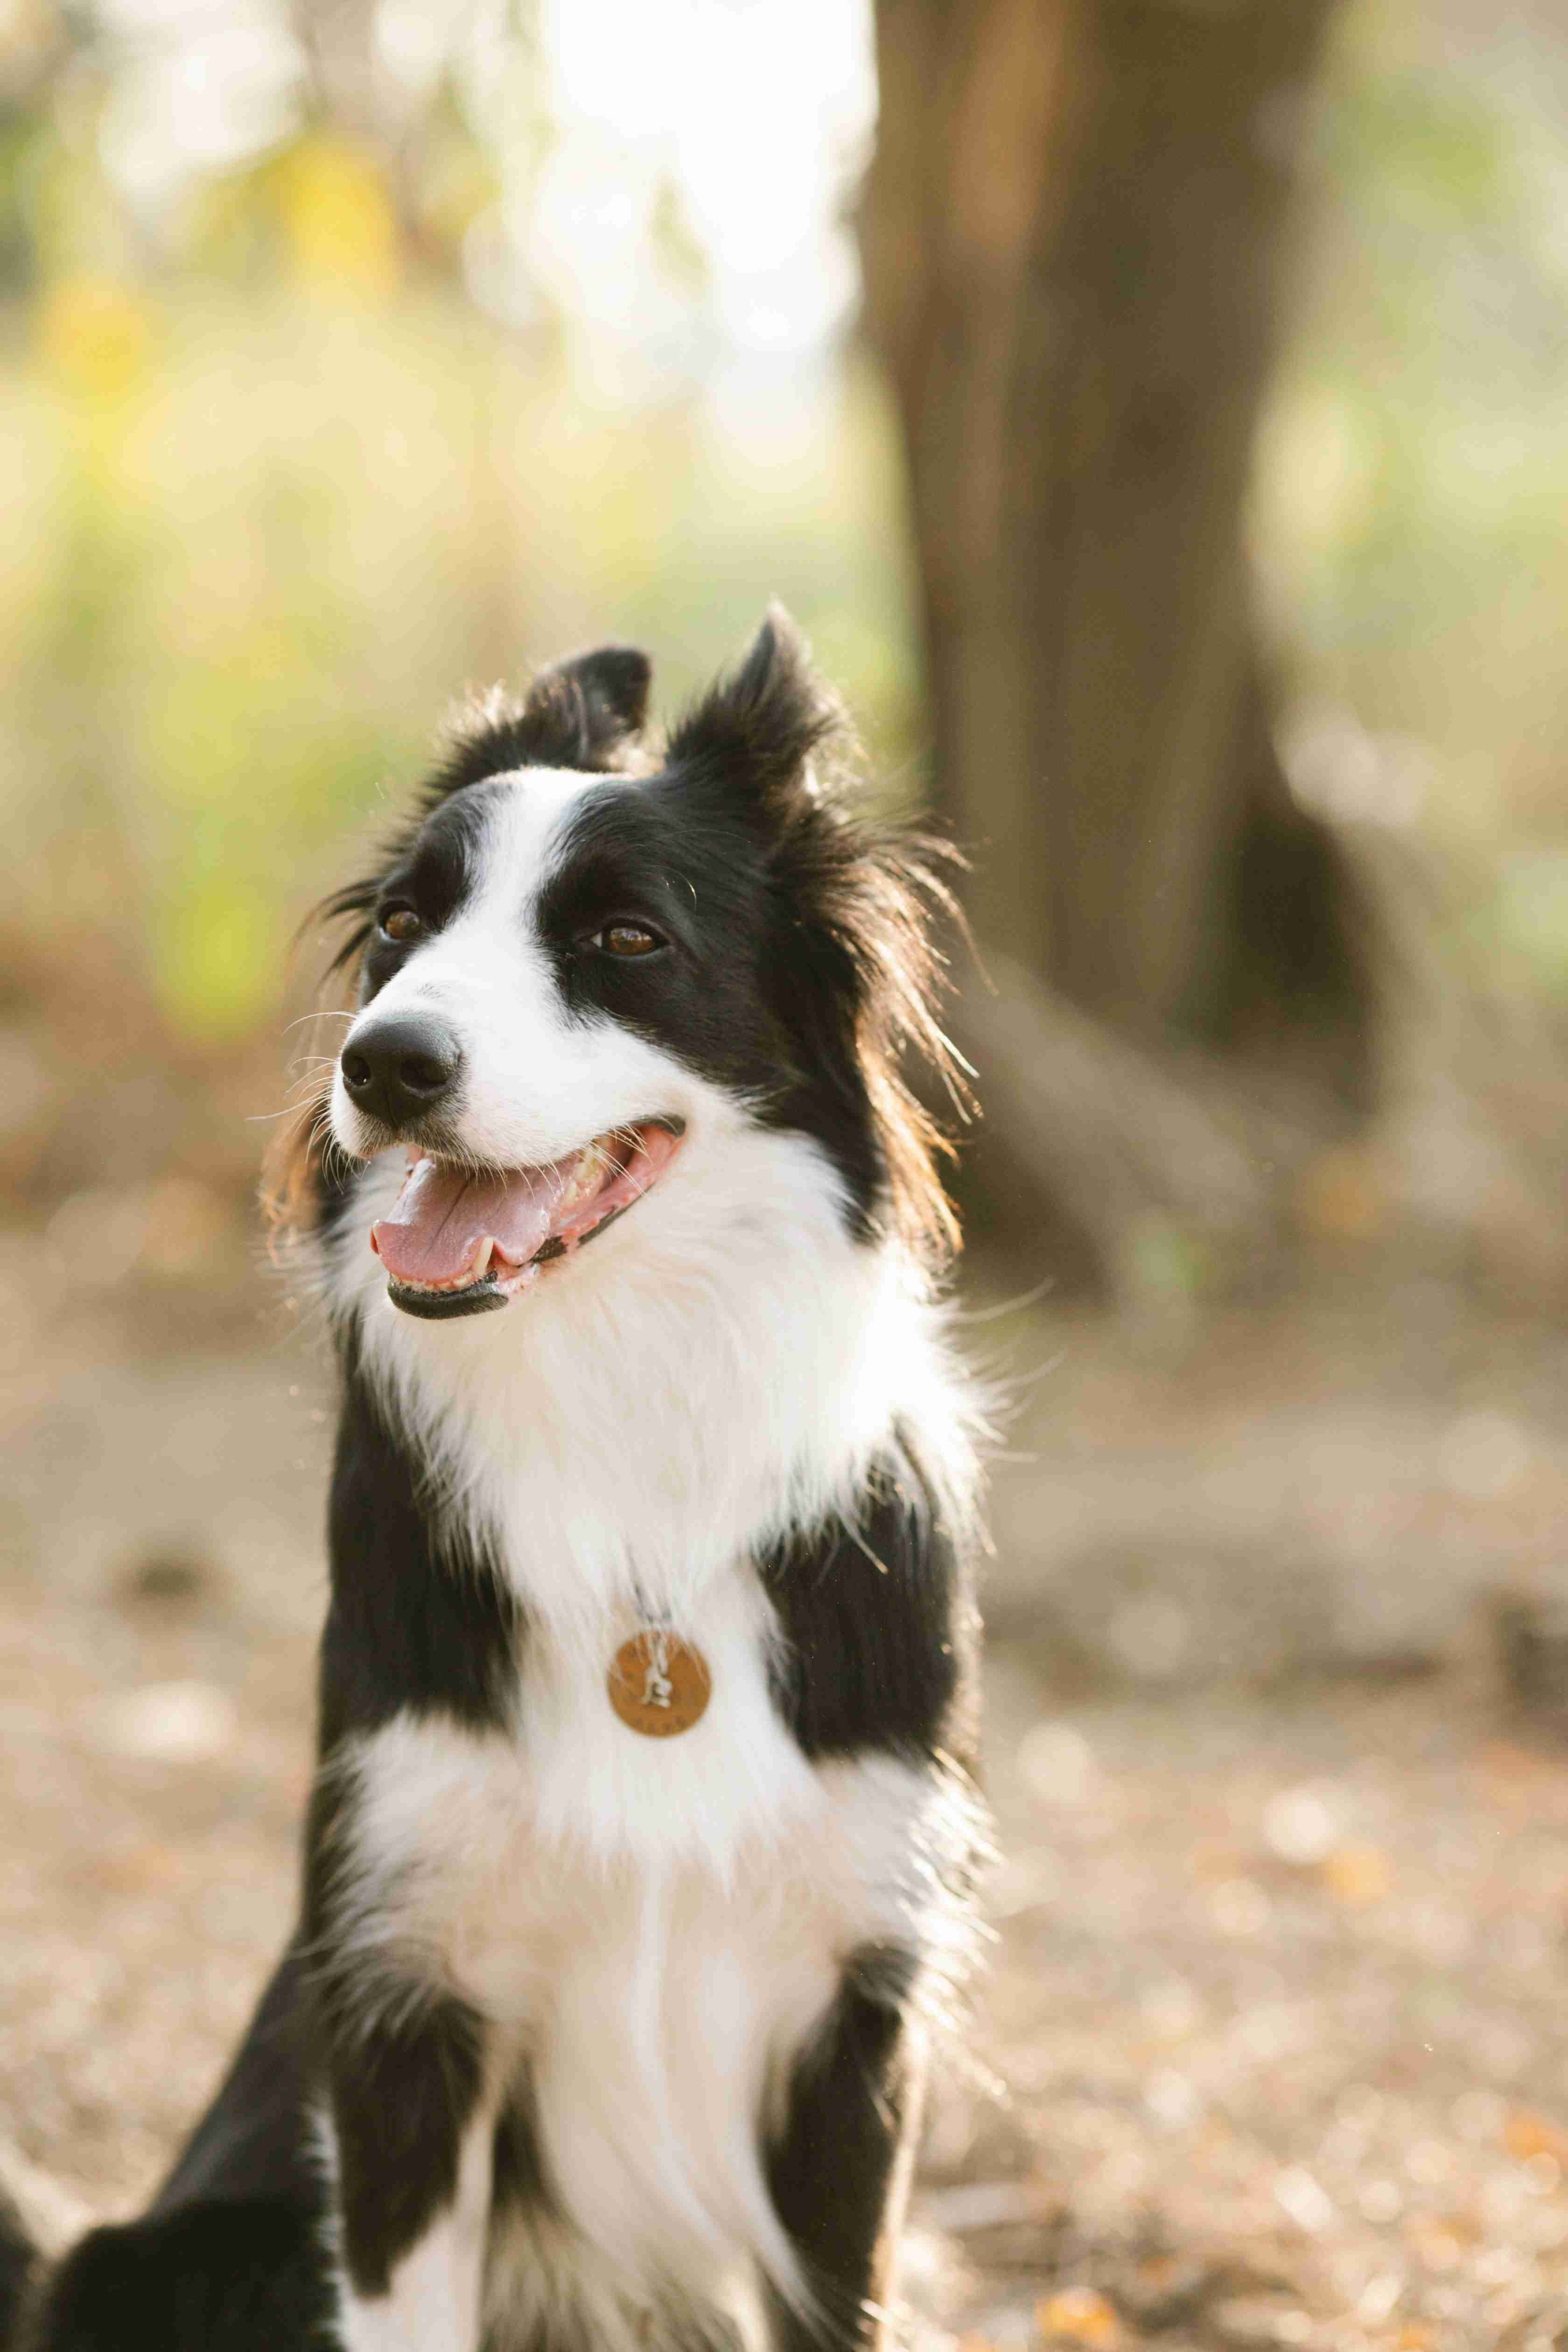 Is Your Border Collie at Risk of a Brain Tumor? Learn the Top Symptoms to Watch Out For